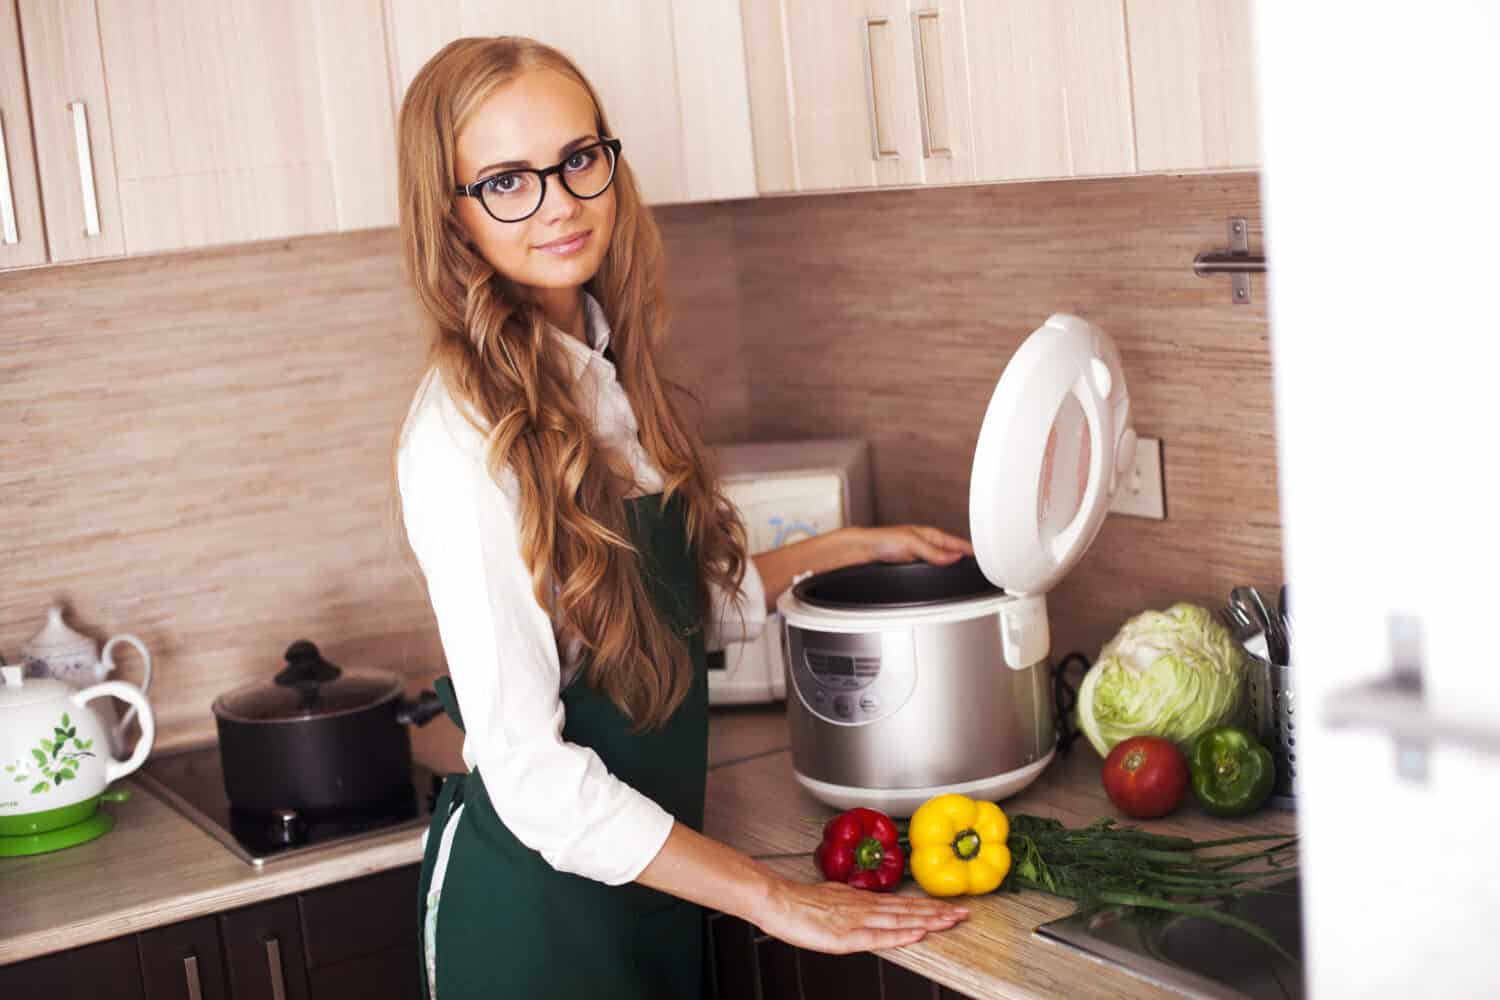 beautiful girl in the kitchen with crockpot slo-cooker